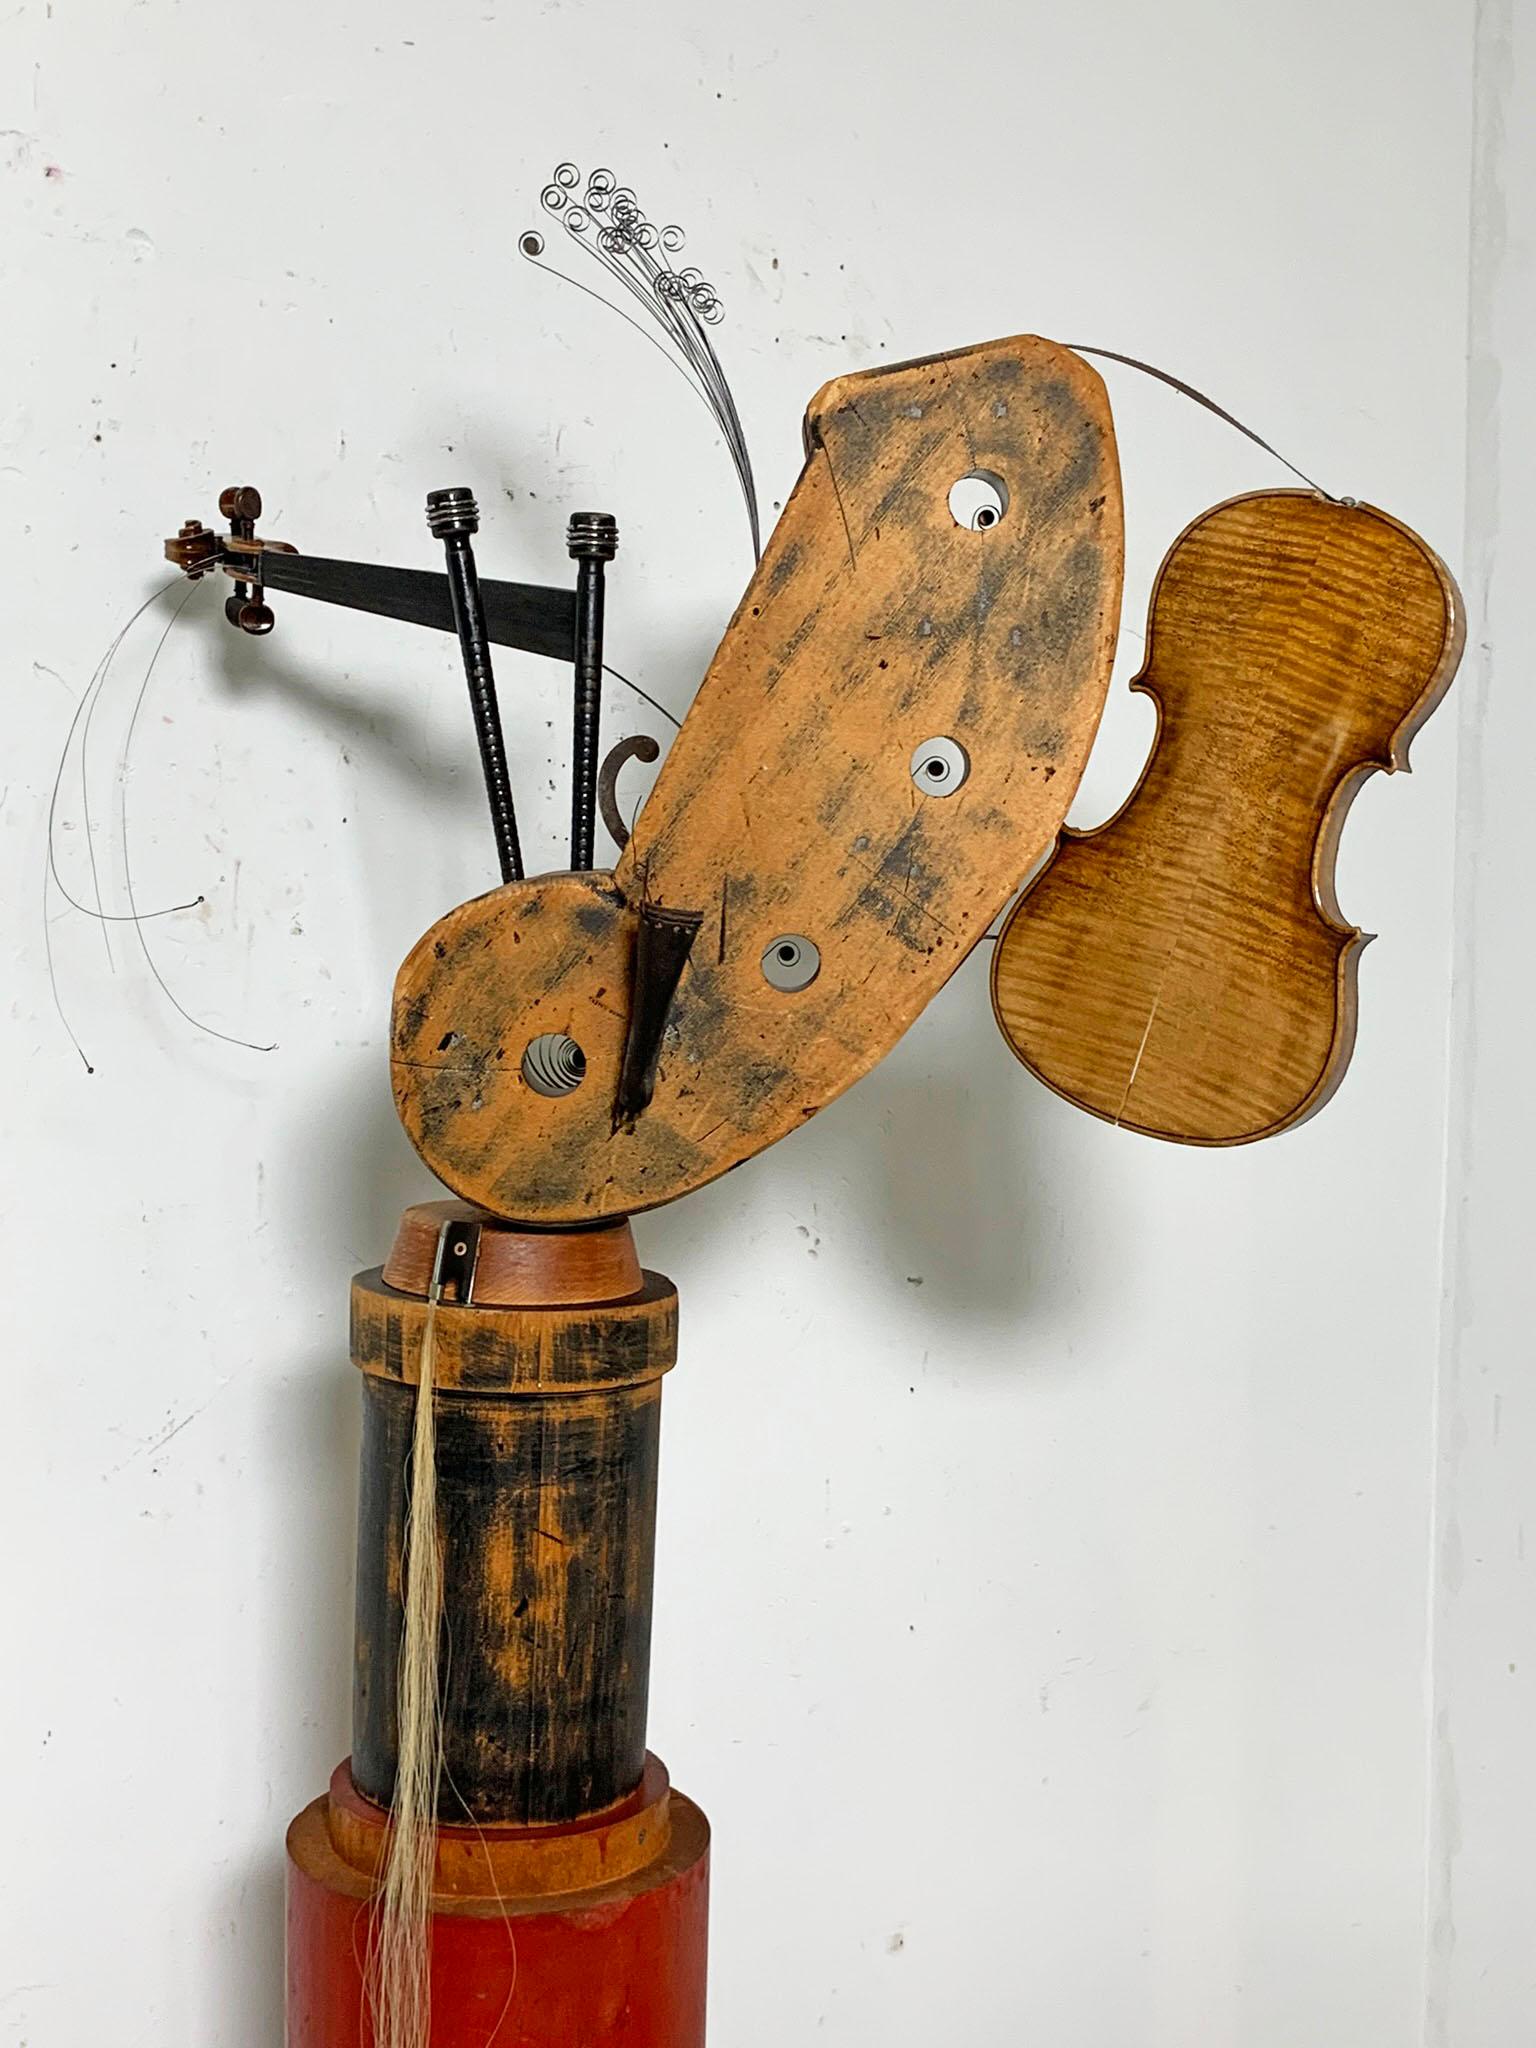 We recently acquired a collection of mid to late 20th century sculptures by the Newton, Massachusetts artist, psychotherapist and inventor Mayer Spivack. A lifelong innovator and creative theorist, his art was always an expression of the many